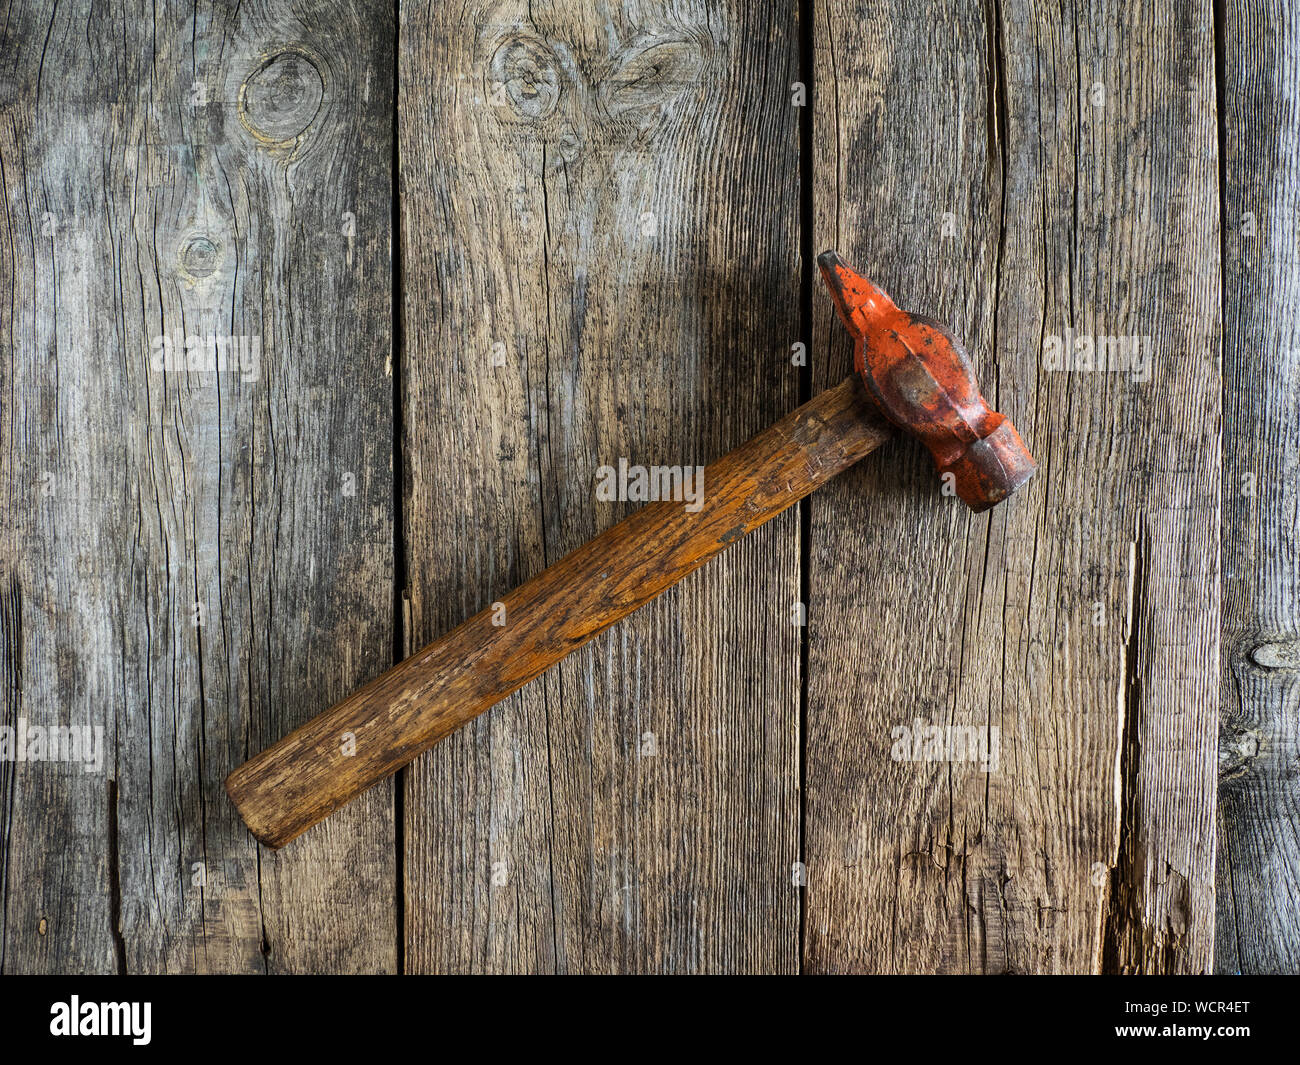 Directly Above View Of Hammer On Wooden Table Stock Photo